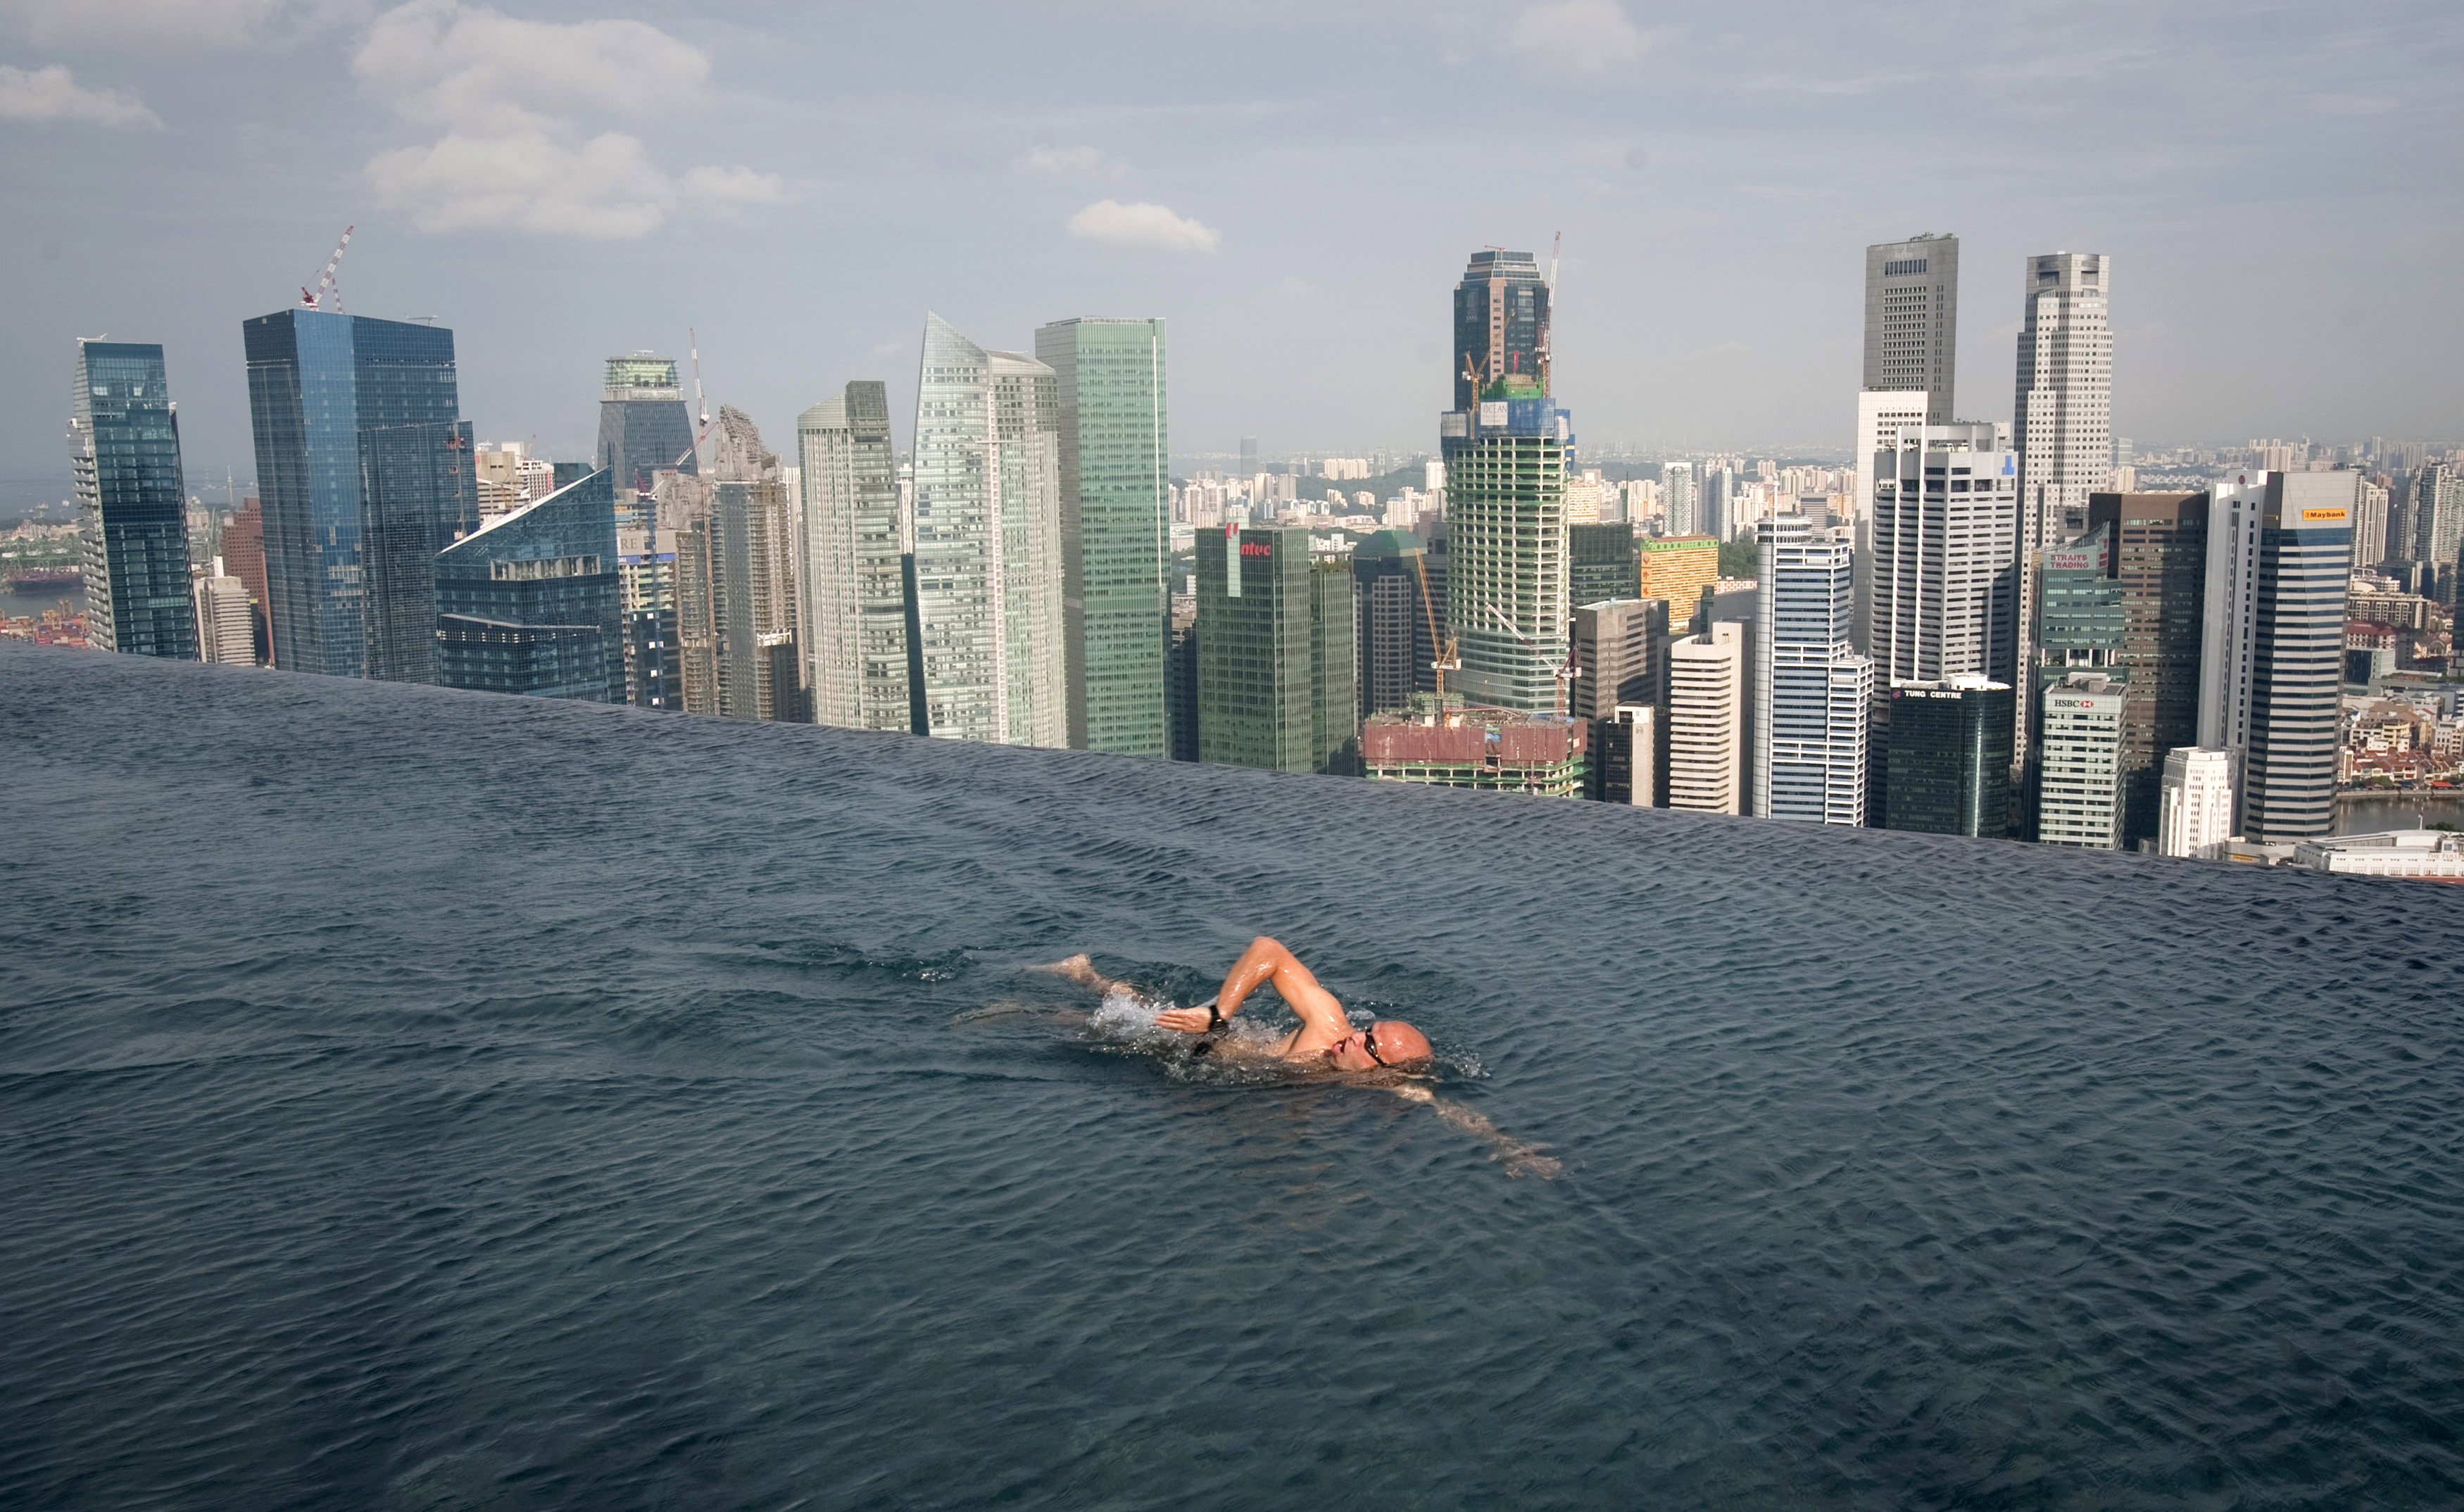 A guest swims in the infinity pool of the Skypark that tops the Marina Bay Sands hotel towers in Singapore, in this June 24, 2010 file photo. Singapore economy grew much faster than initially estimated in the third quarter thanks to a solid service sector, data showed on November 25, 2015, but the government softened its growth outlook for the year amid sluggish global demand. REUTERS/Vivek Prakash/Files